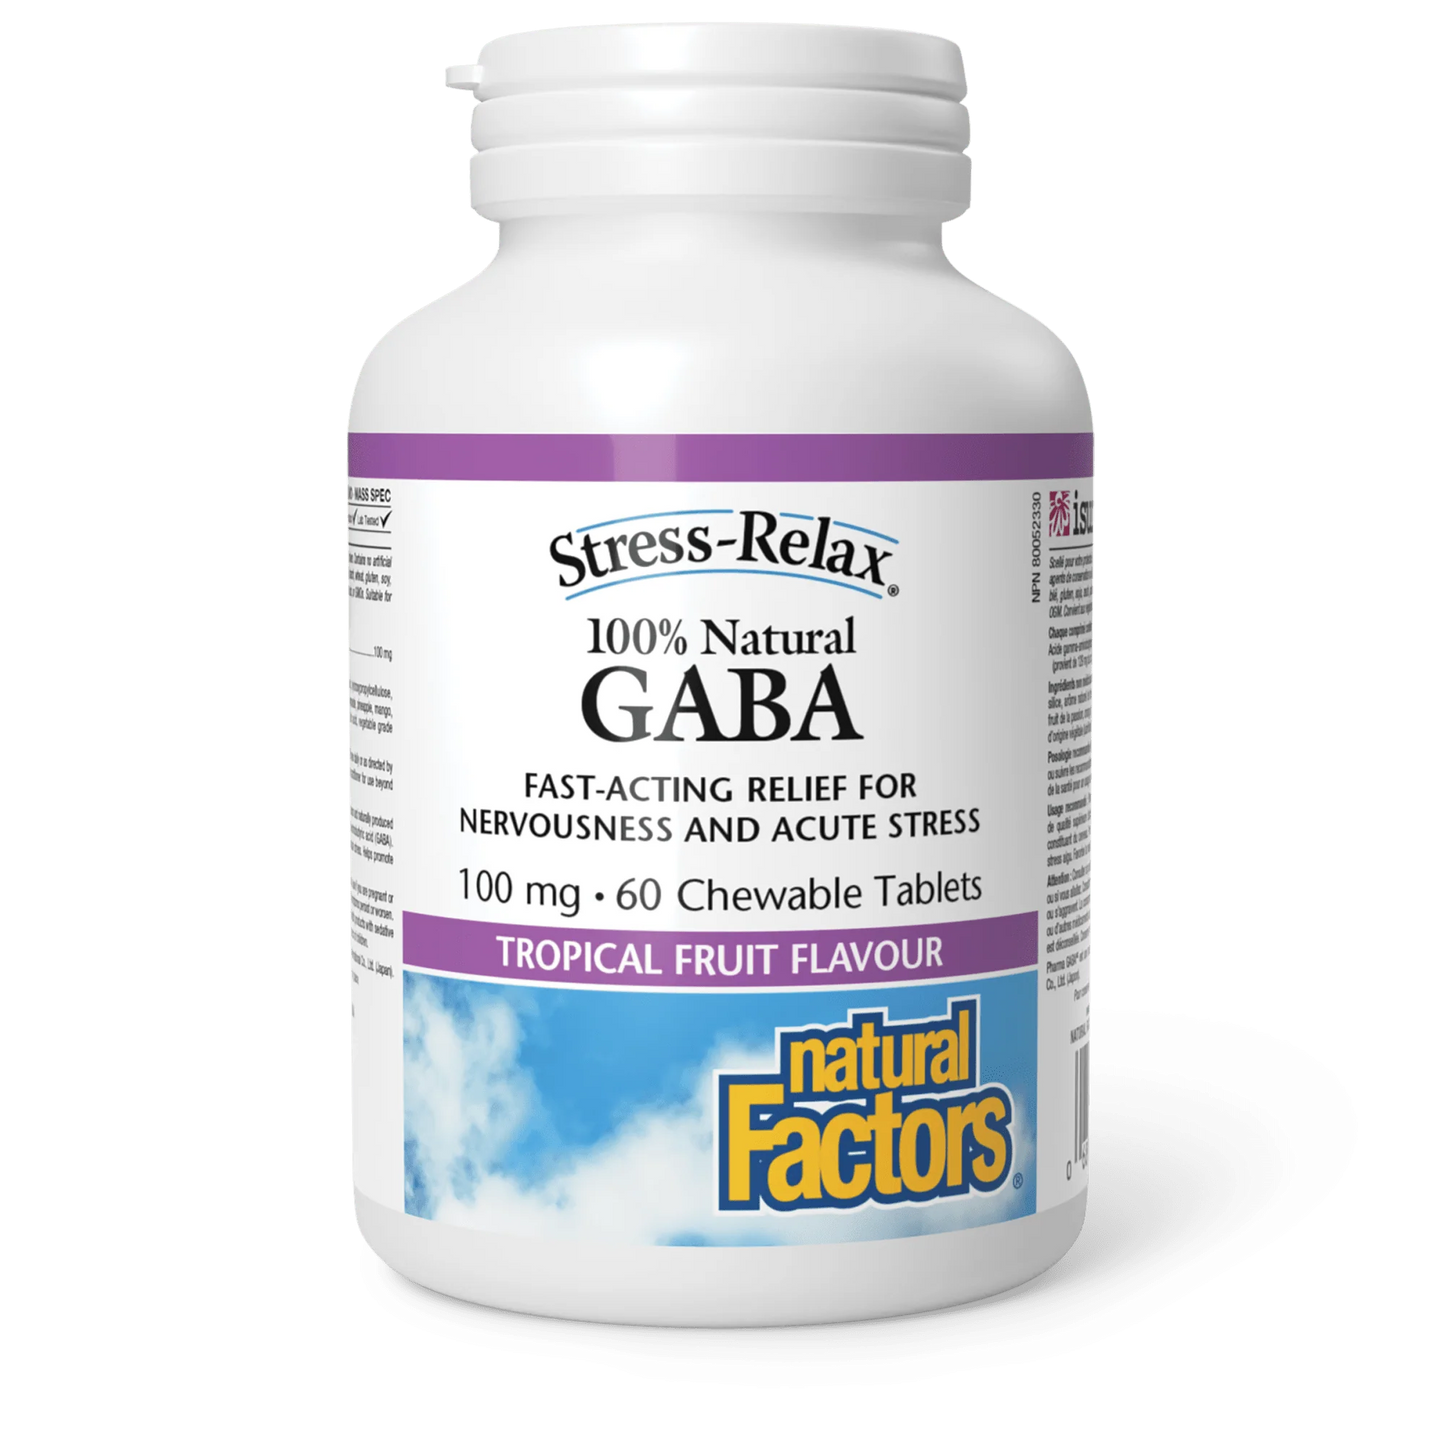 Stress-Relax GABA (Chewable Tablets)